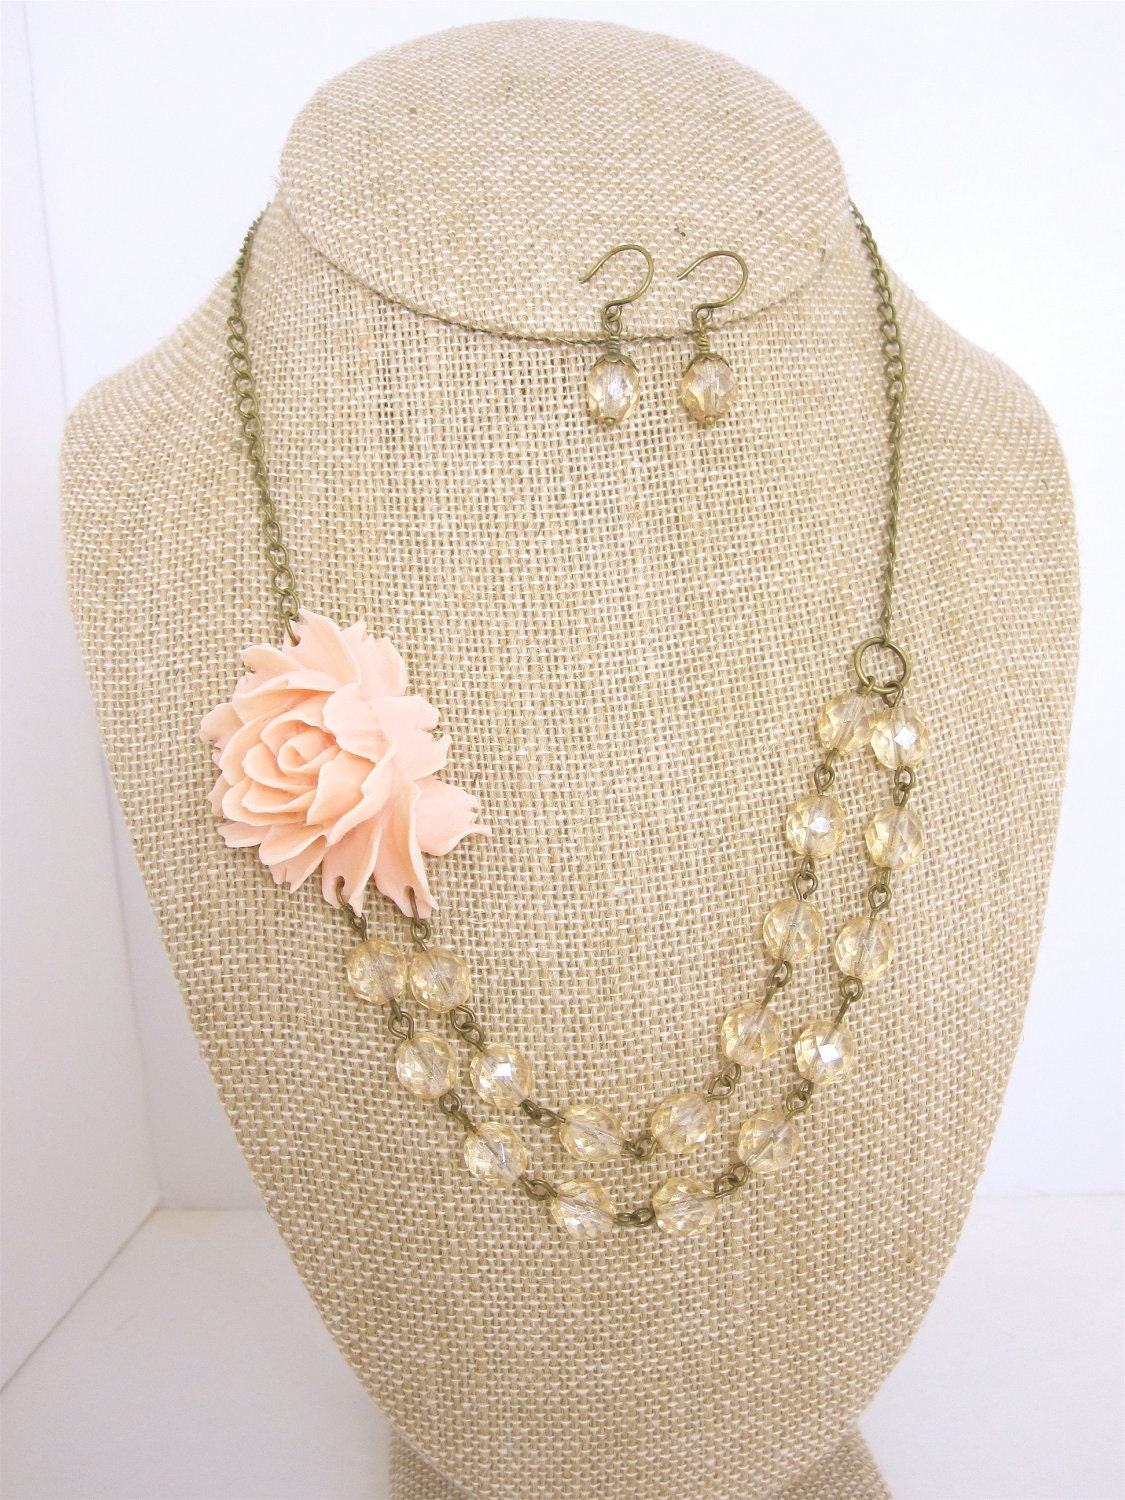 Pastel Pink Rose Flower Necklace with Champagne Glass Beads and Matching Earrings